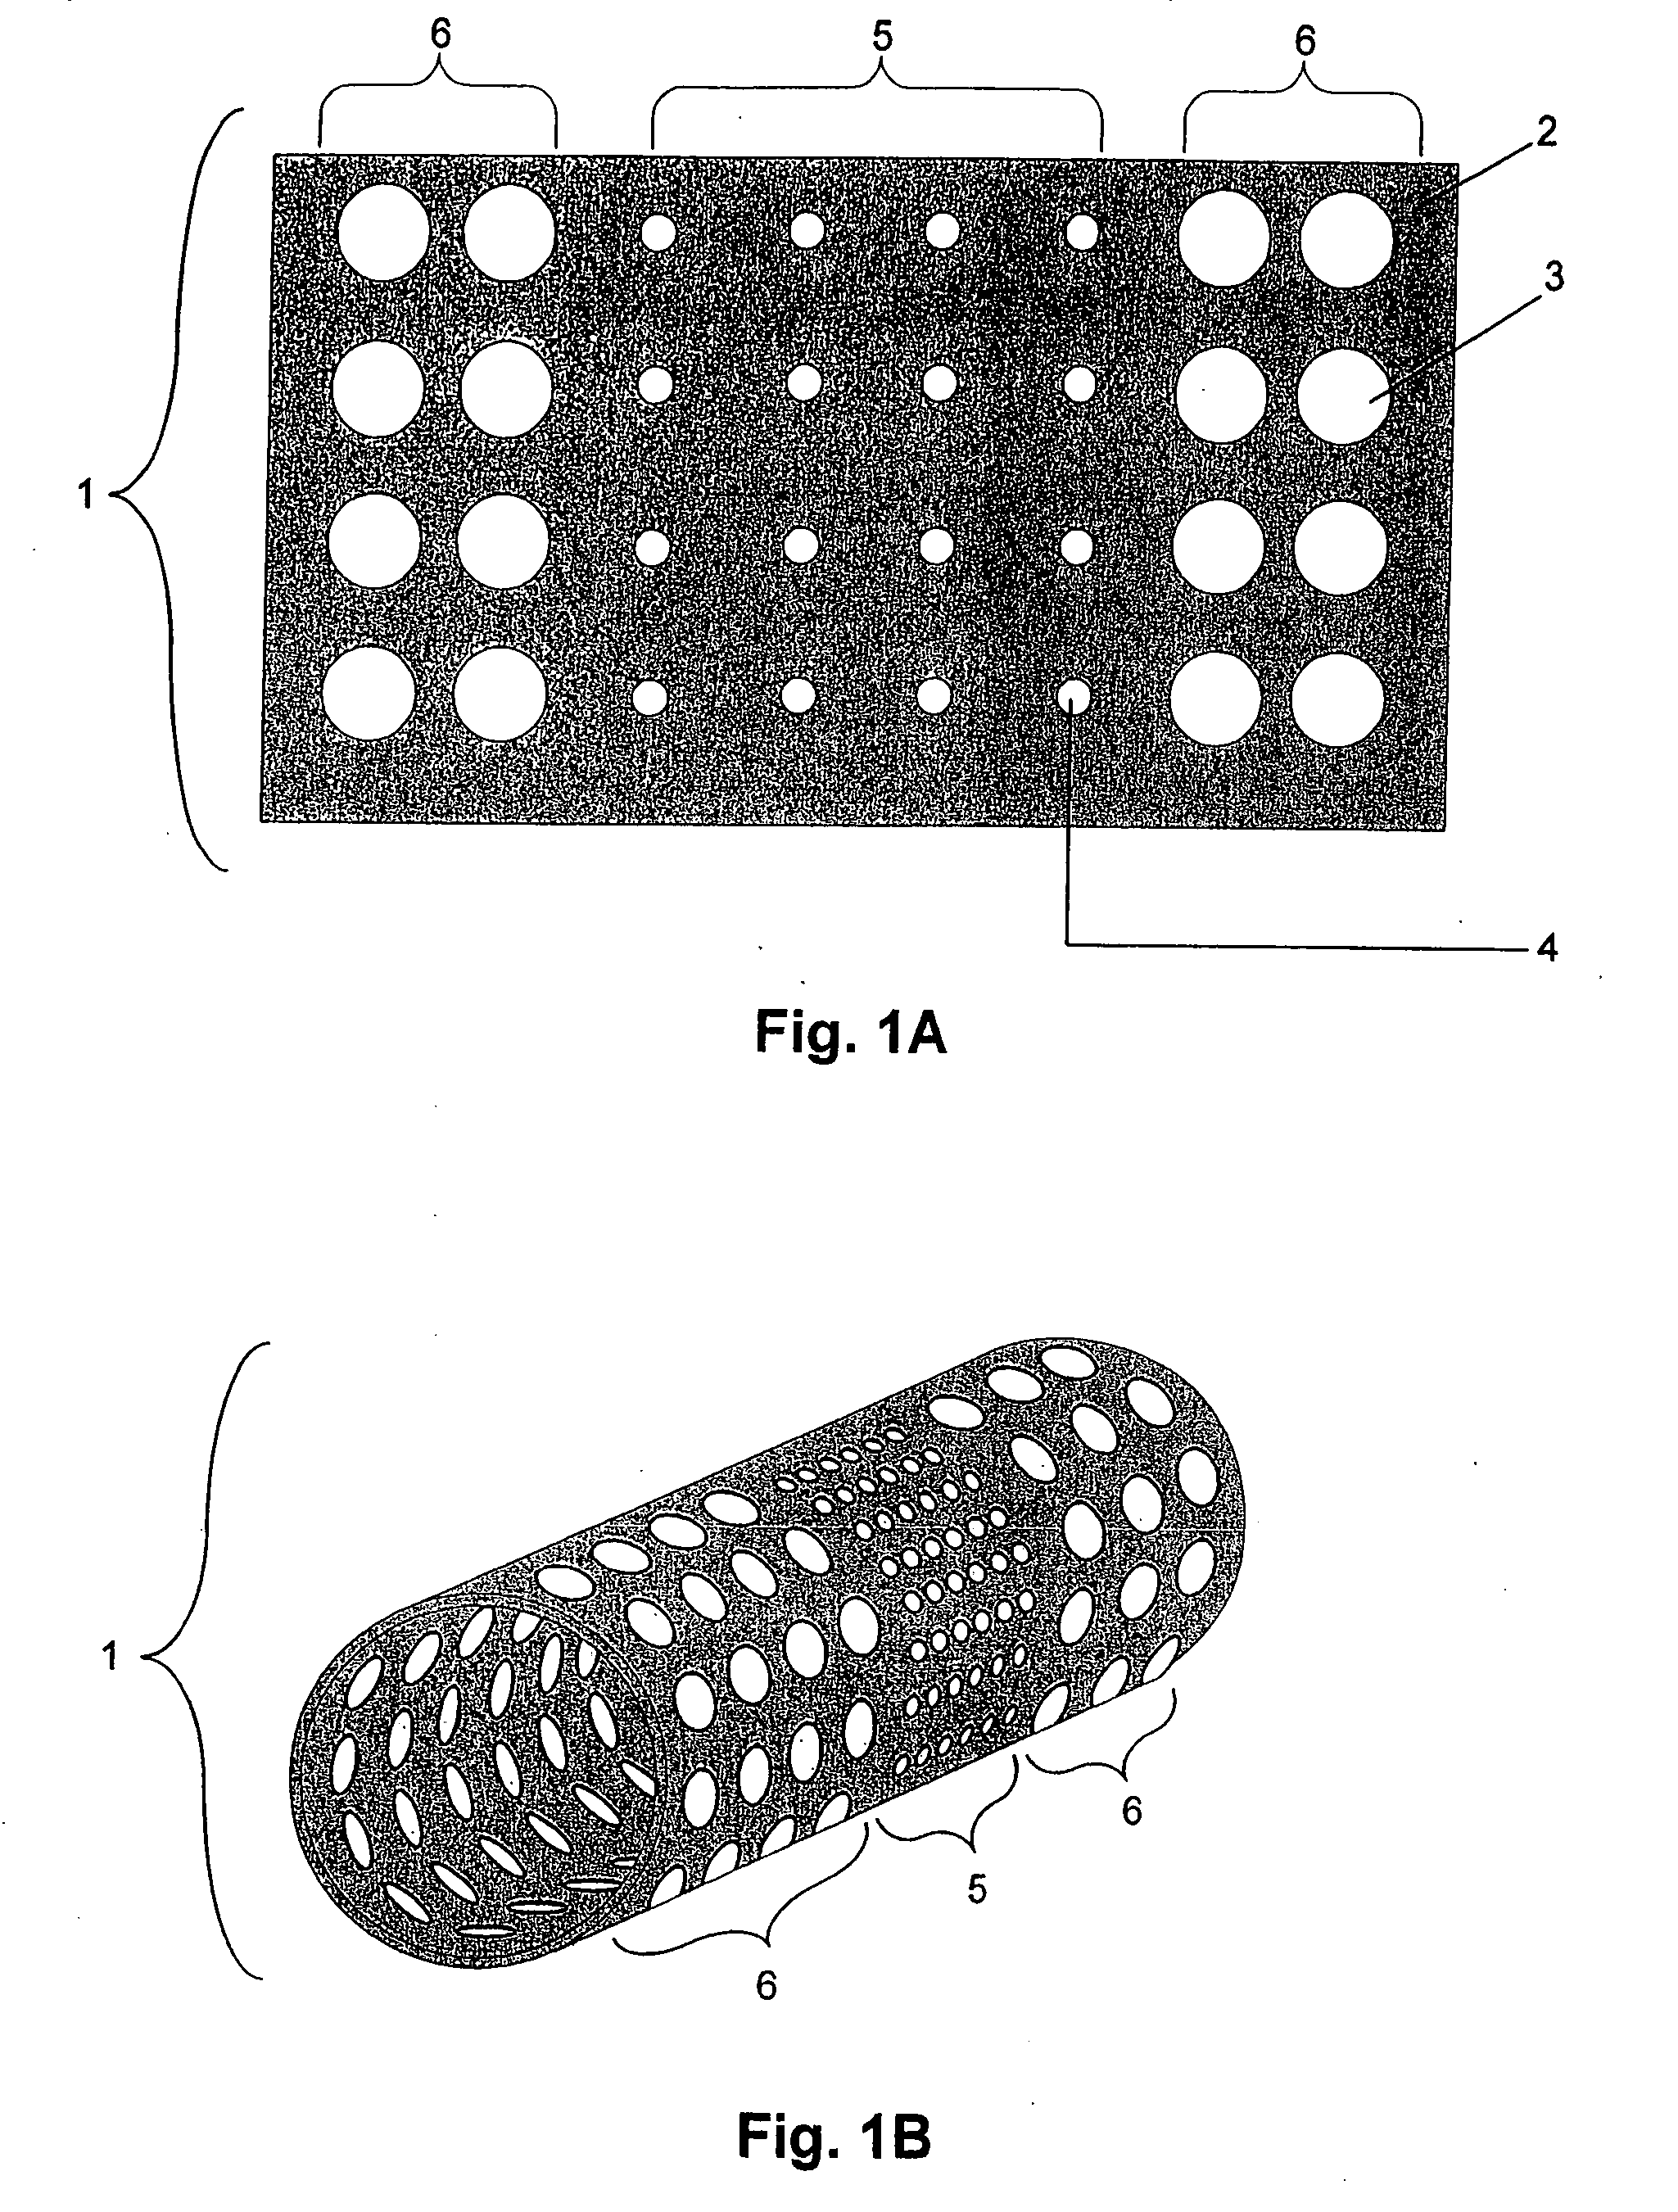 Covering for an endoprosthetic device and methods of using for aneurysm treatment